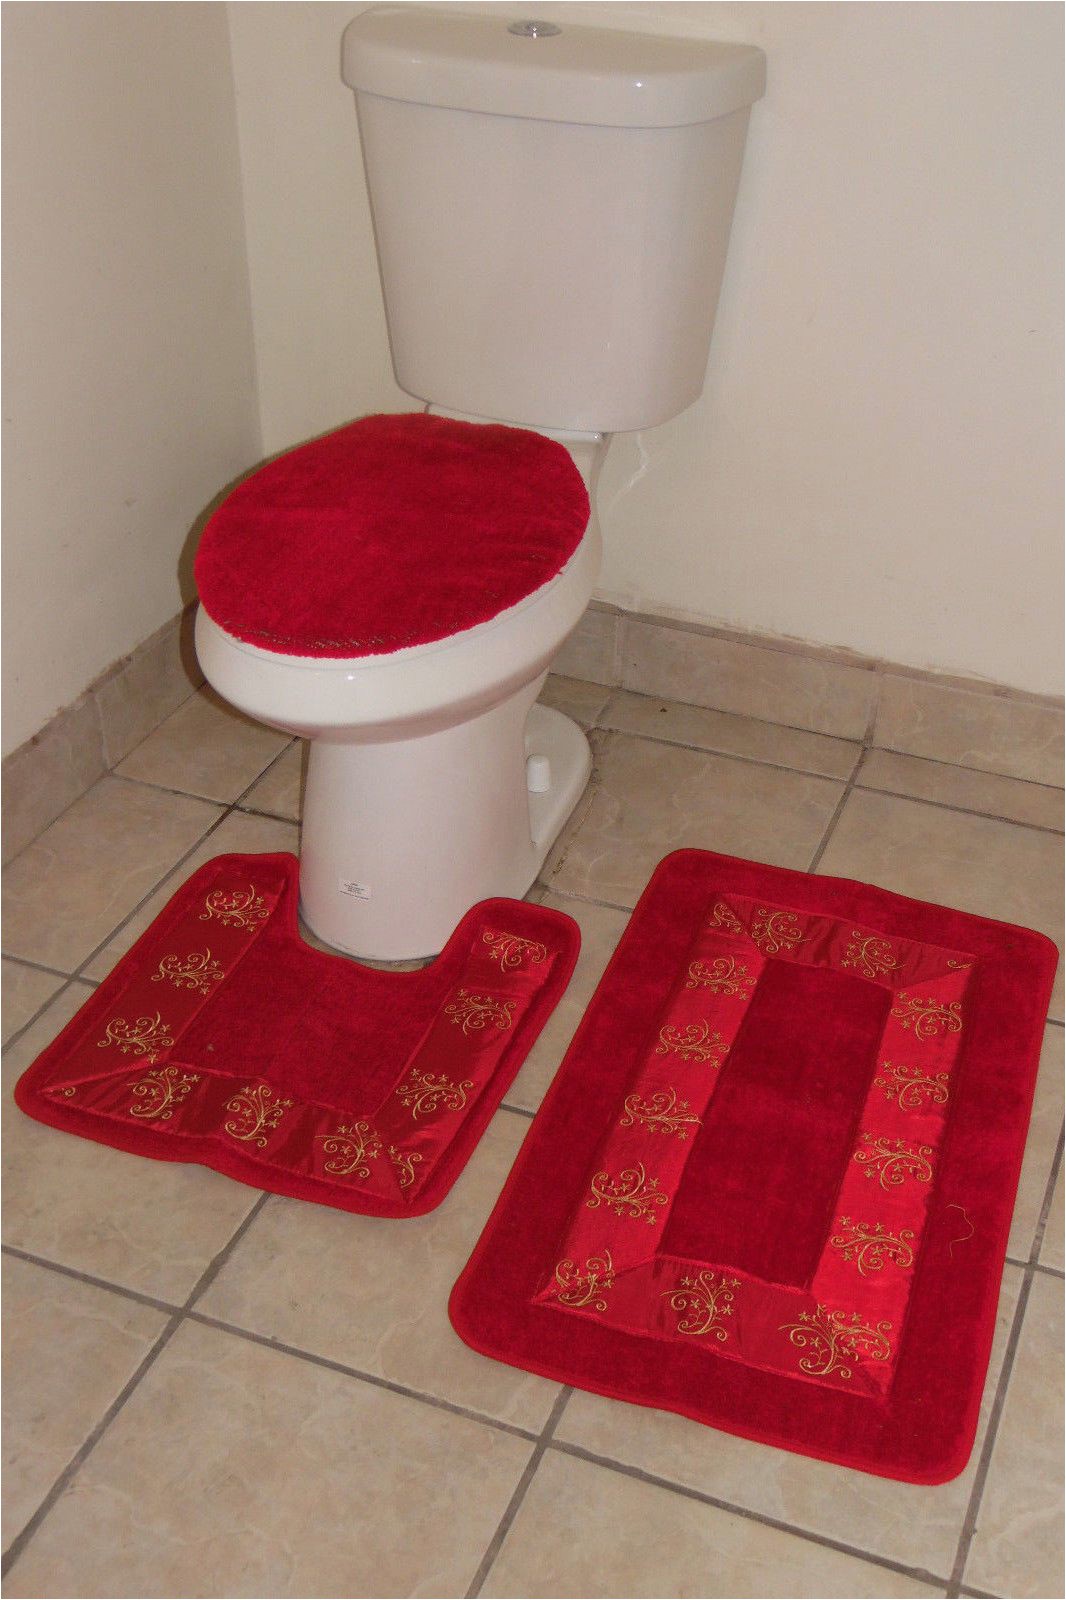 Bathroom Rugs and toilet Seat Covers Bathmats Rugs and toilet Covers 3pc 5 Red Bathroom